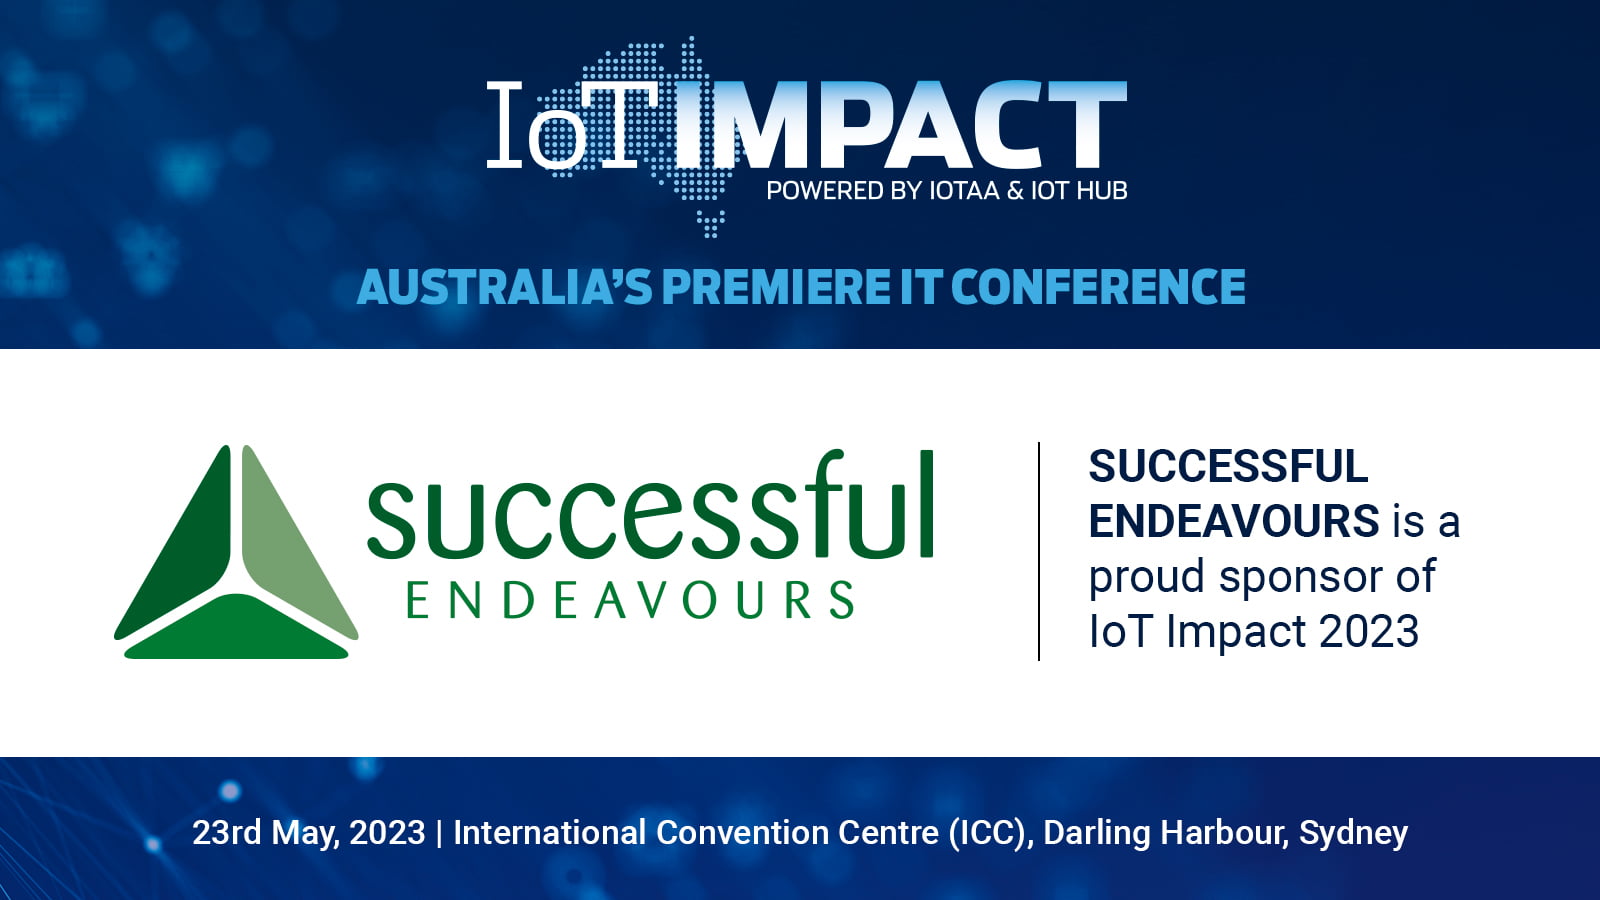 IoT Impact 23 Successful Endeavours